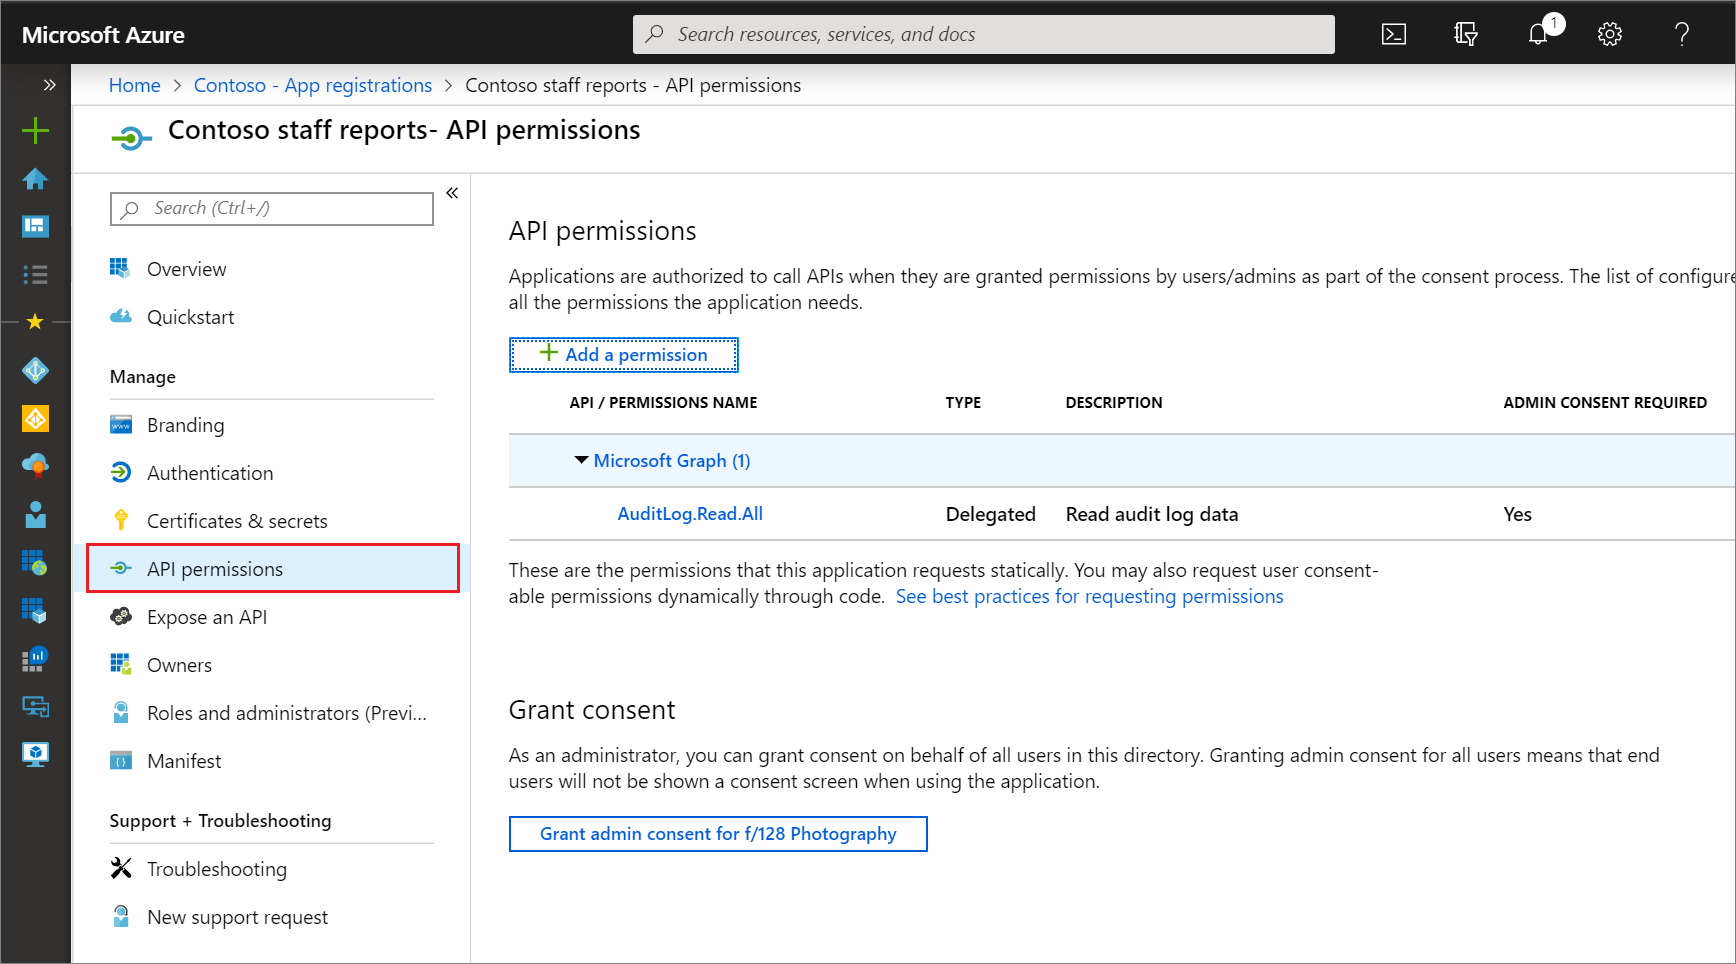 This permissions grants access to the app registration API permissions page